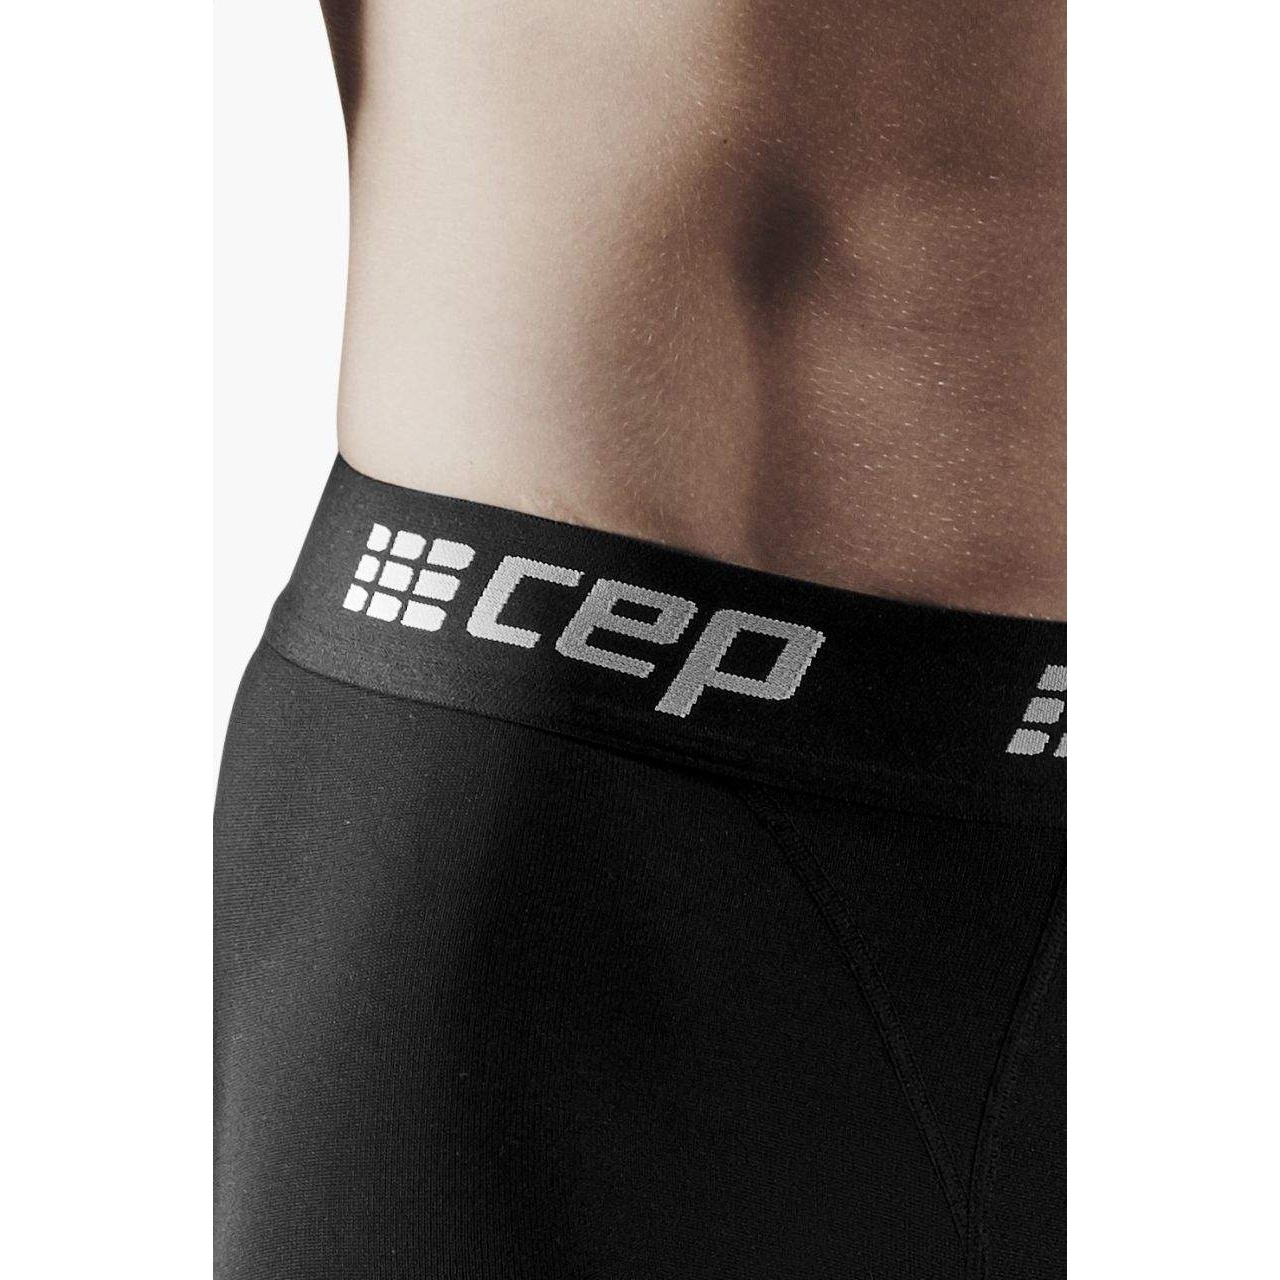 https://images.bike24.com/i/mb/25/1d/63/cep-recovery-pro-tights-black-22-1552934.jpg